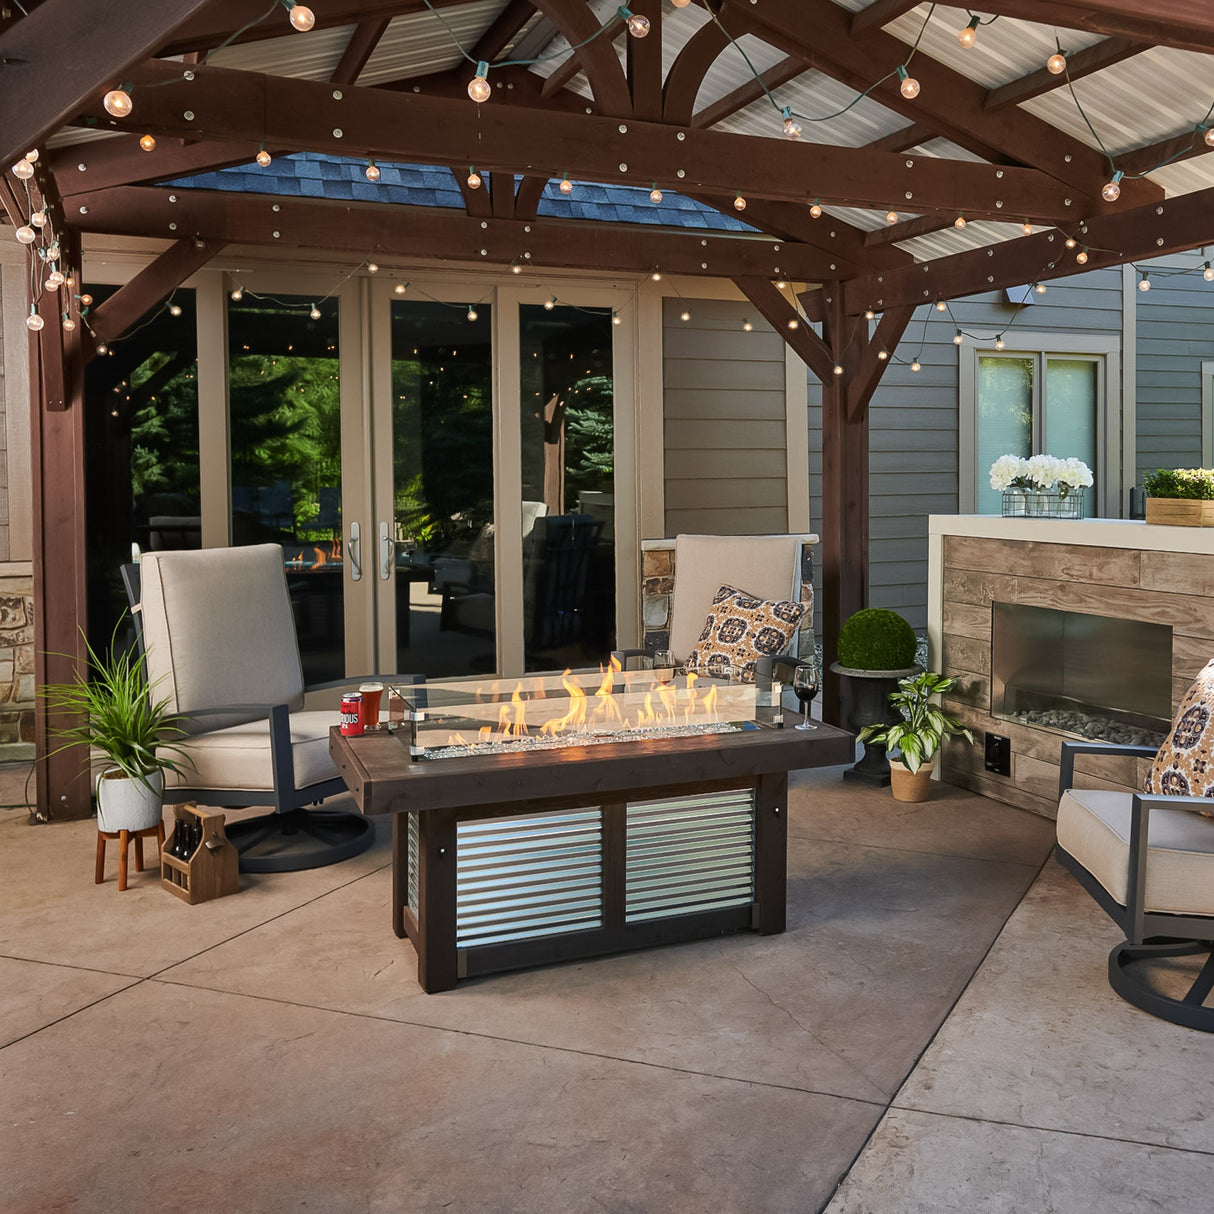 Denali Brew Linear Gas Fire Pit Table placed under a pergola setting with outdoor furniture